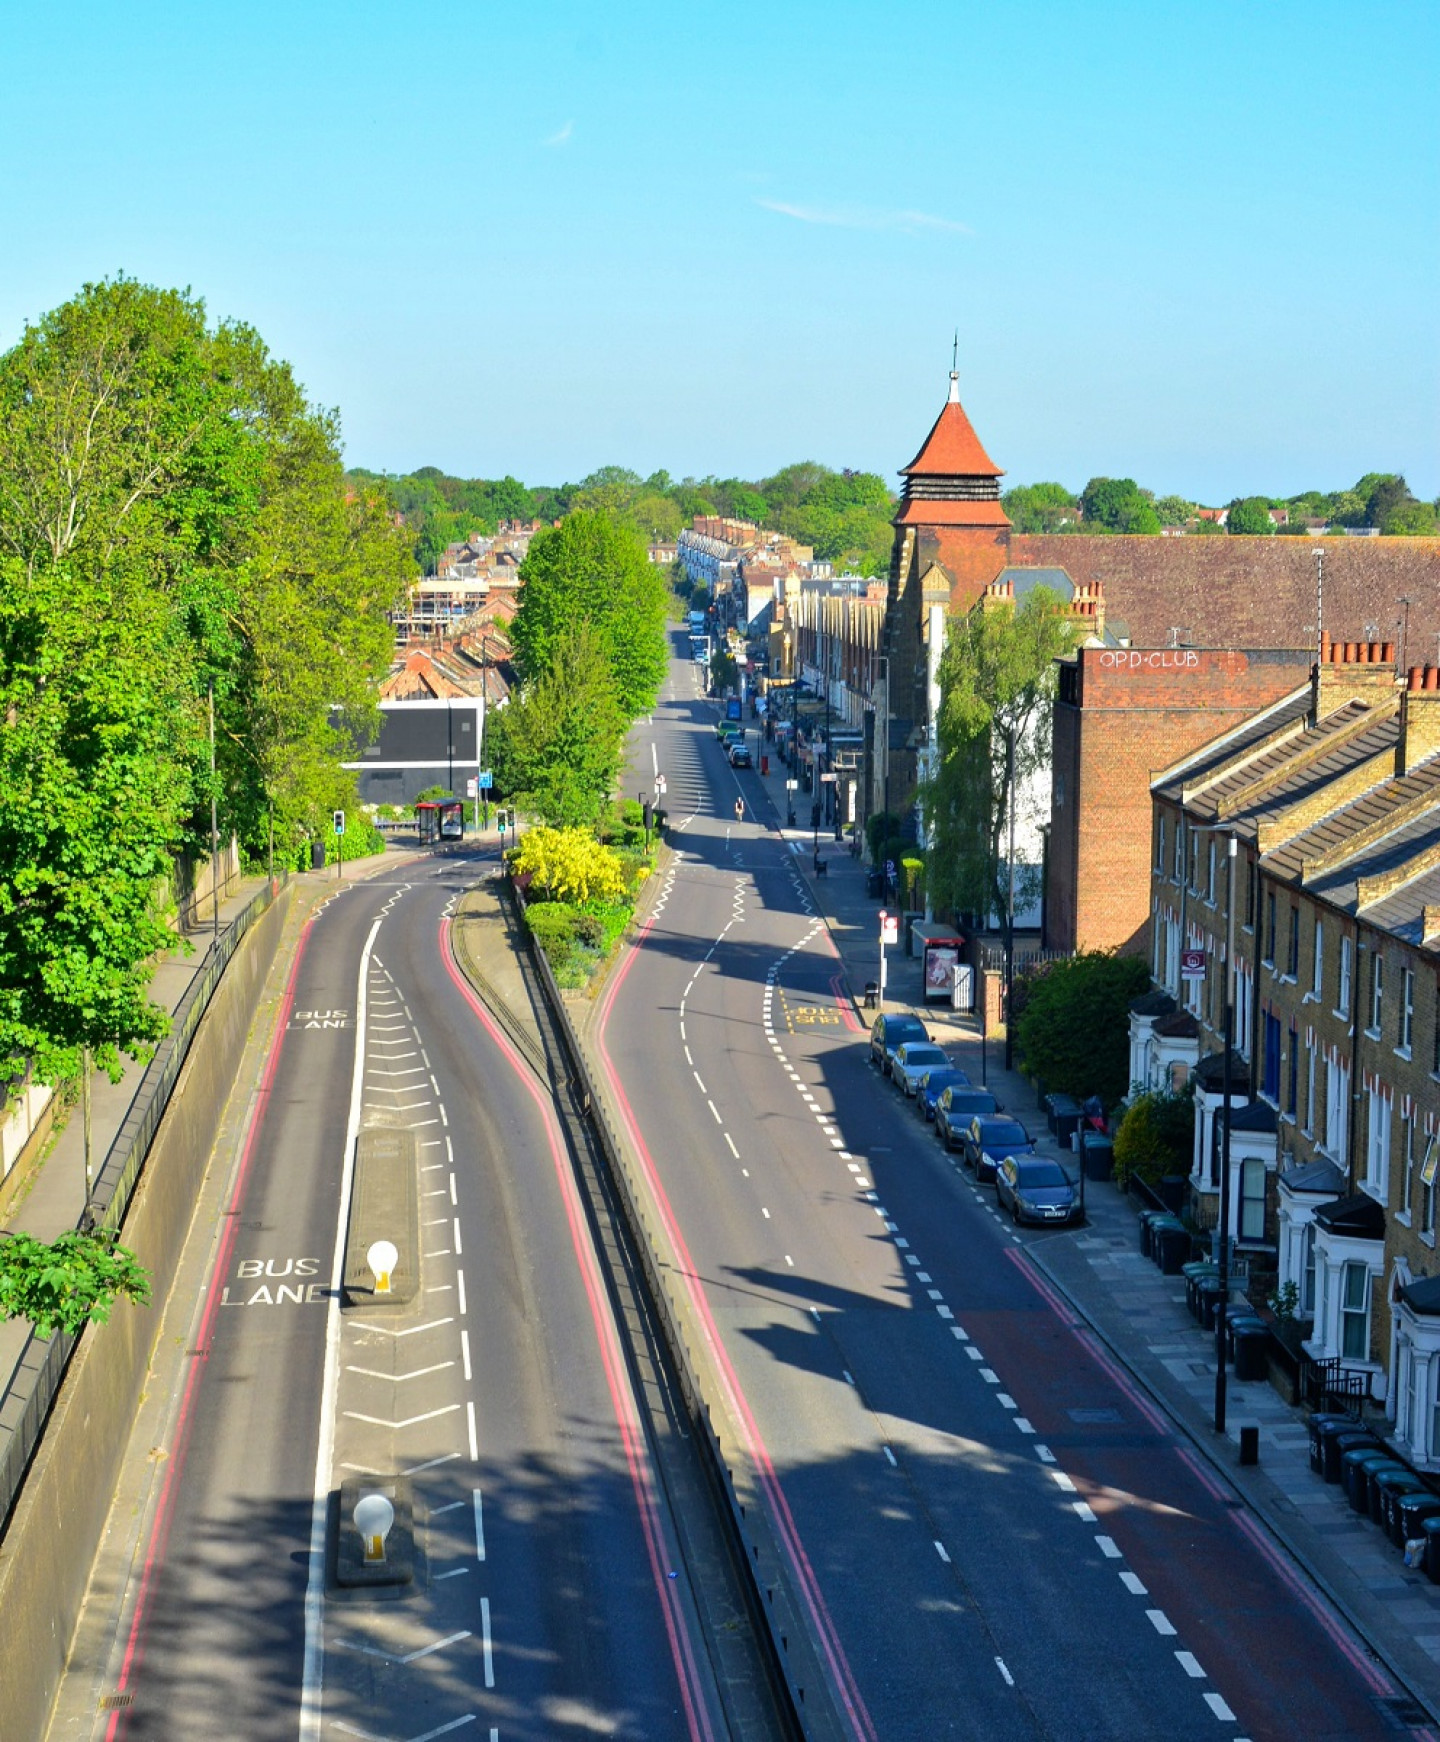 The Great North Rd: looking north towards Highgate. Taken from 'suicide bridge', Sunday 26 April, 9.53 am. © George Demetri